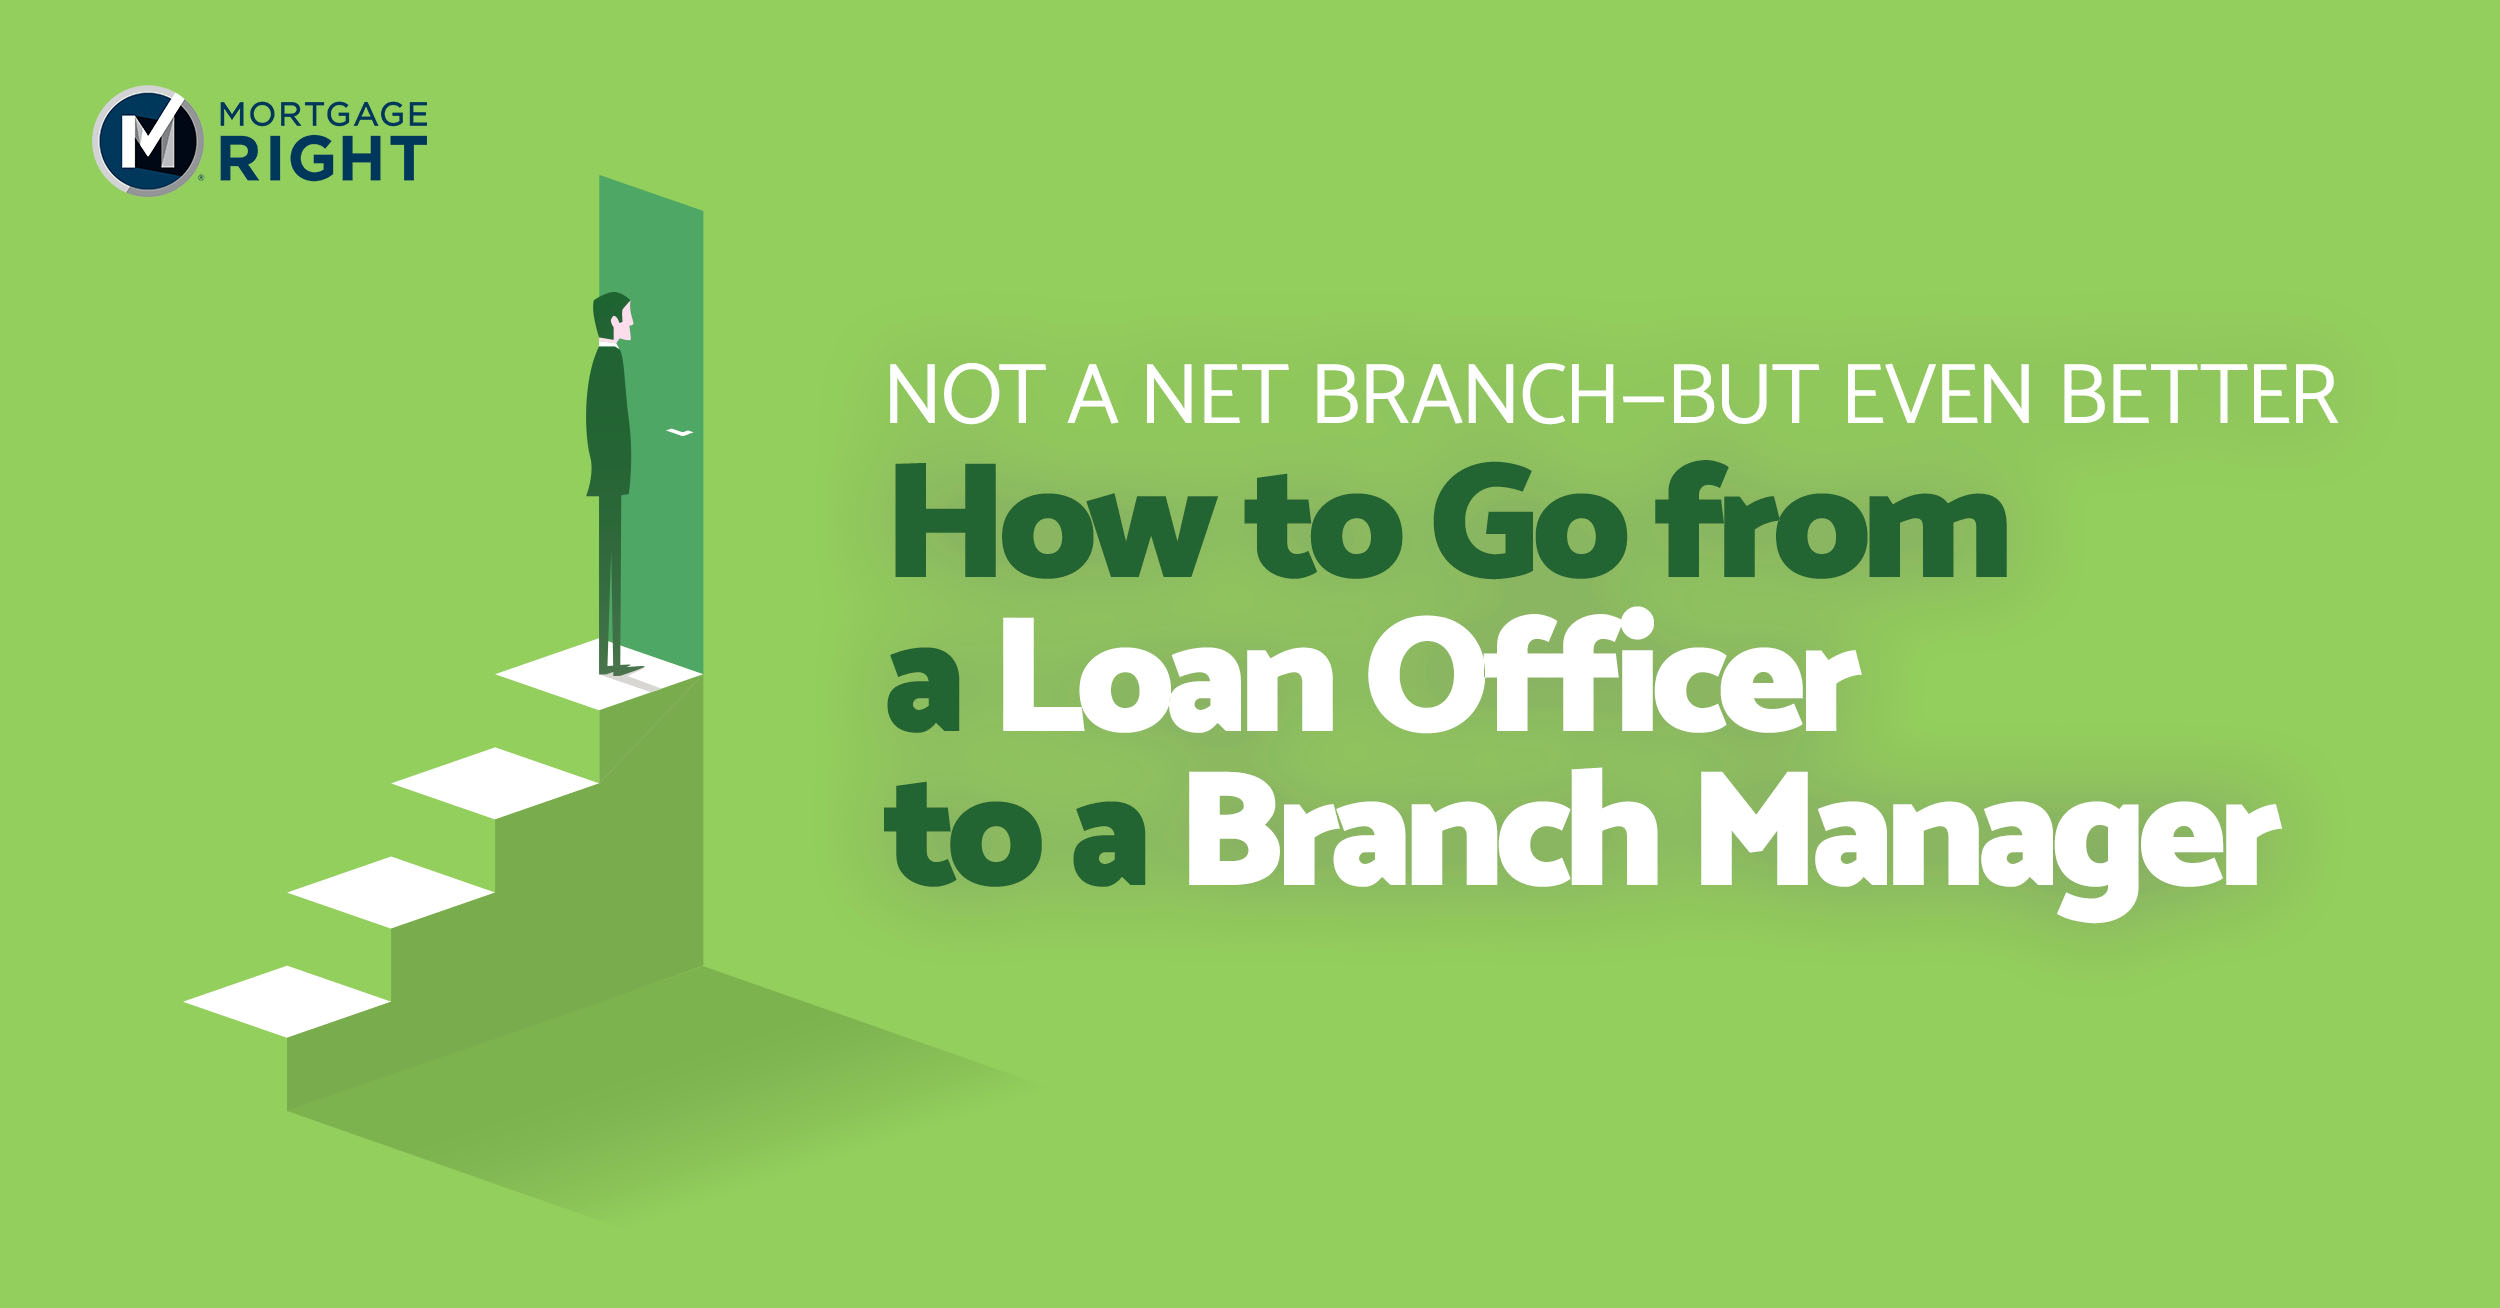 From a loan officer to a branch manager